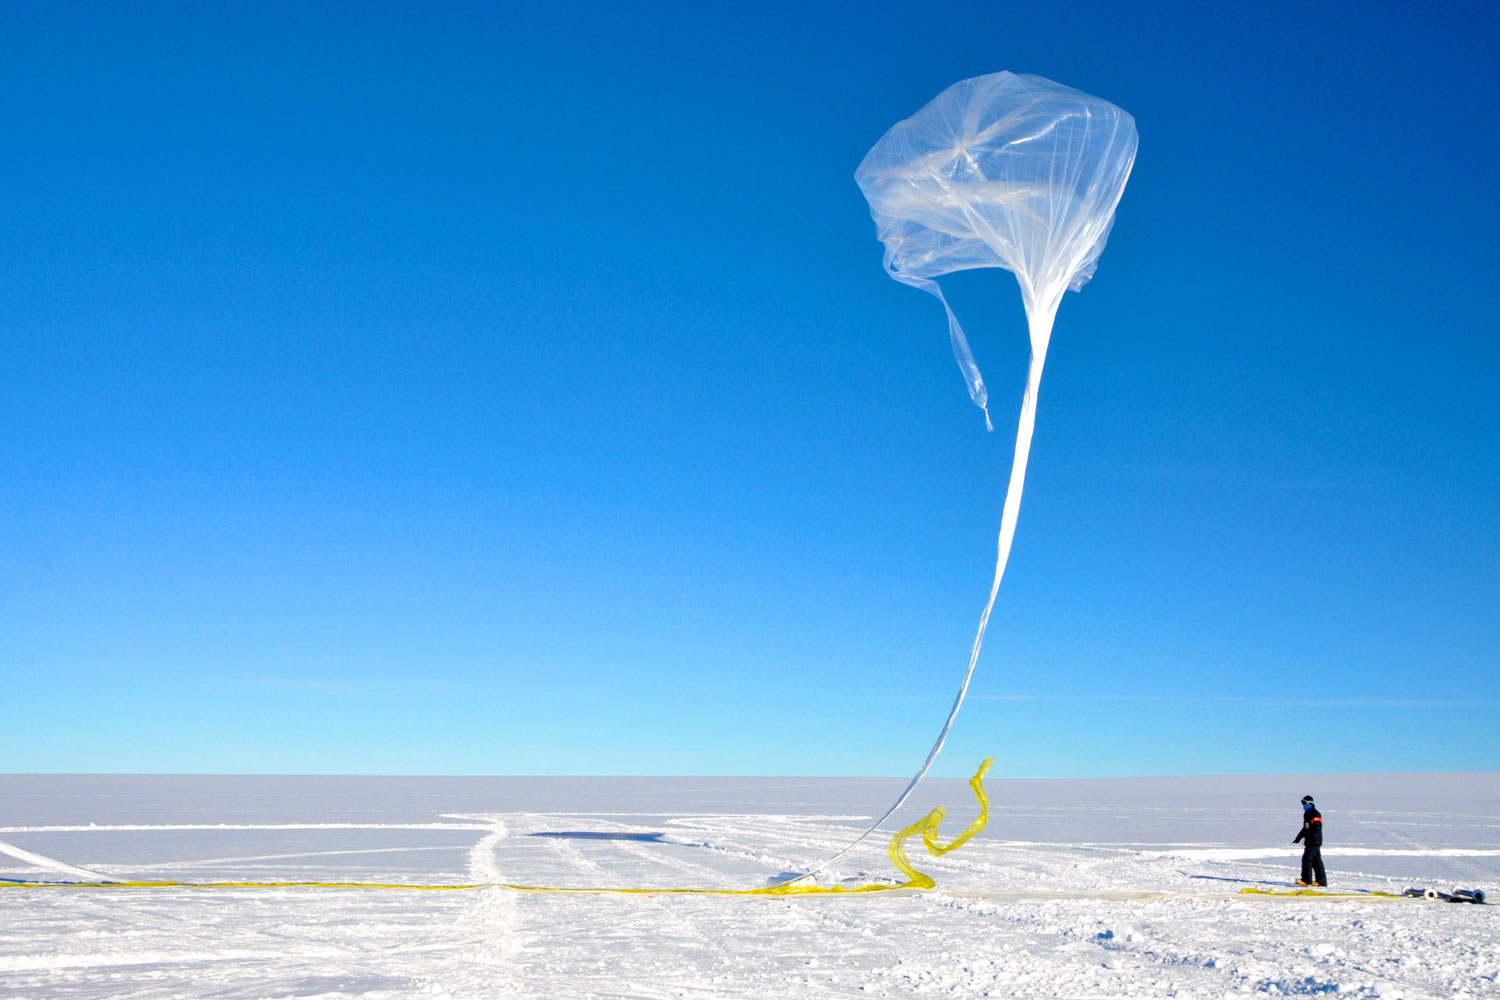 Ballooning in the constant sun of the South Pole summer